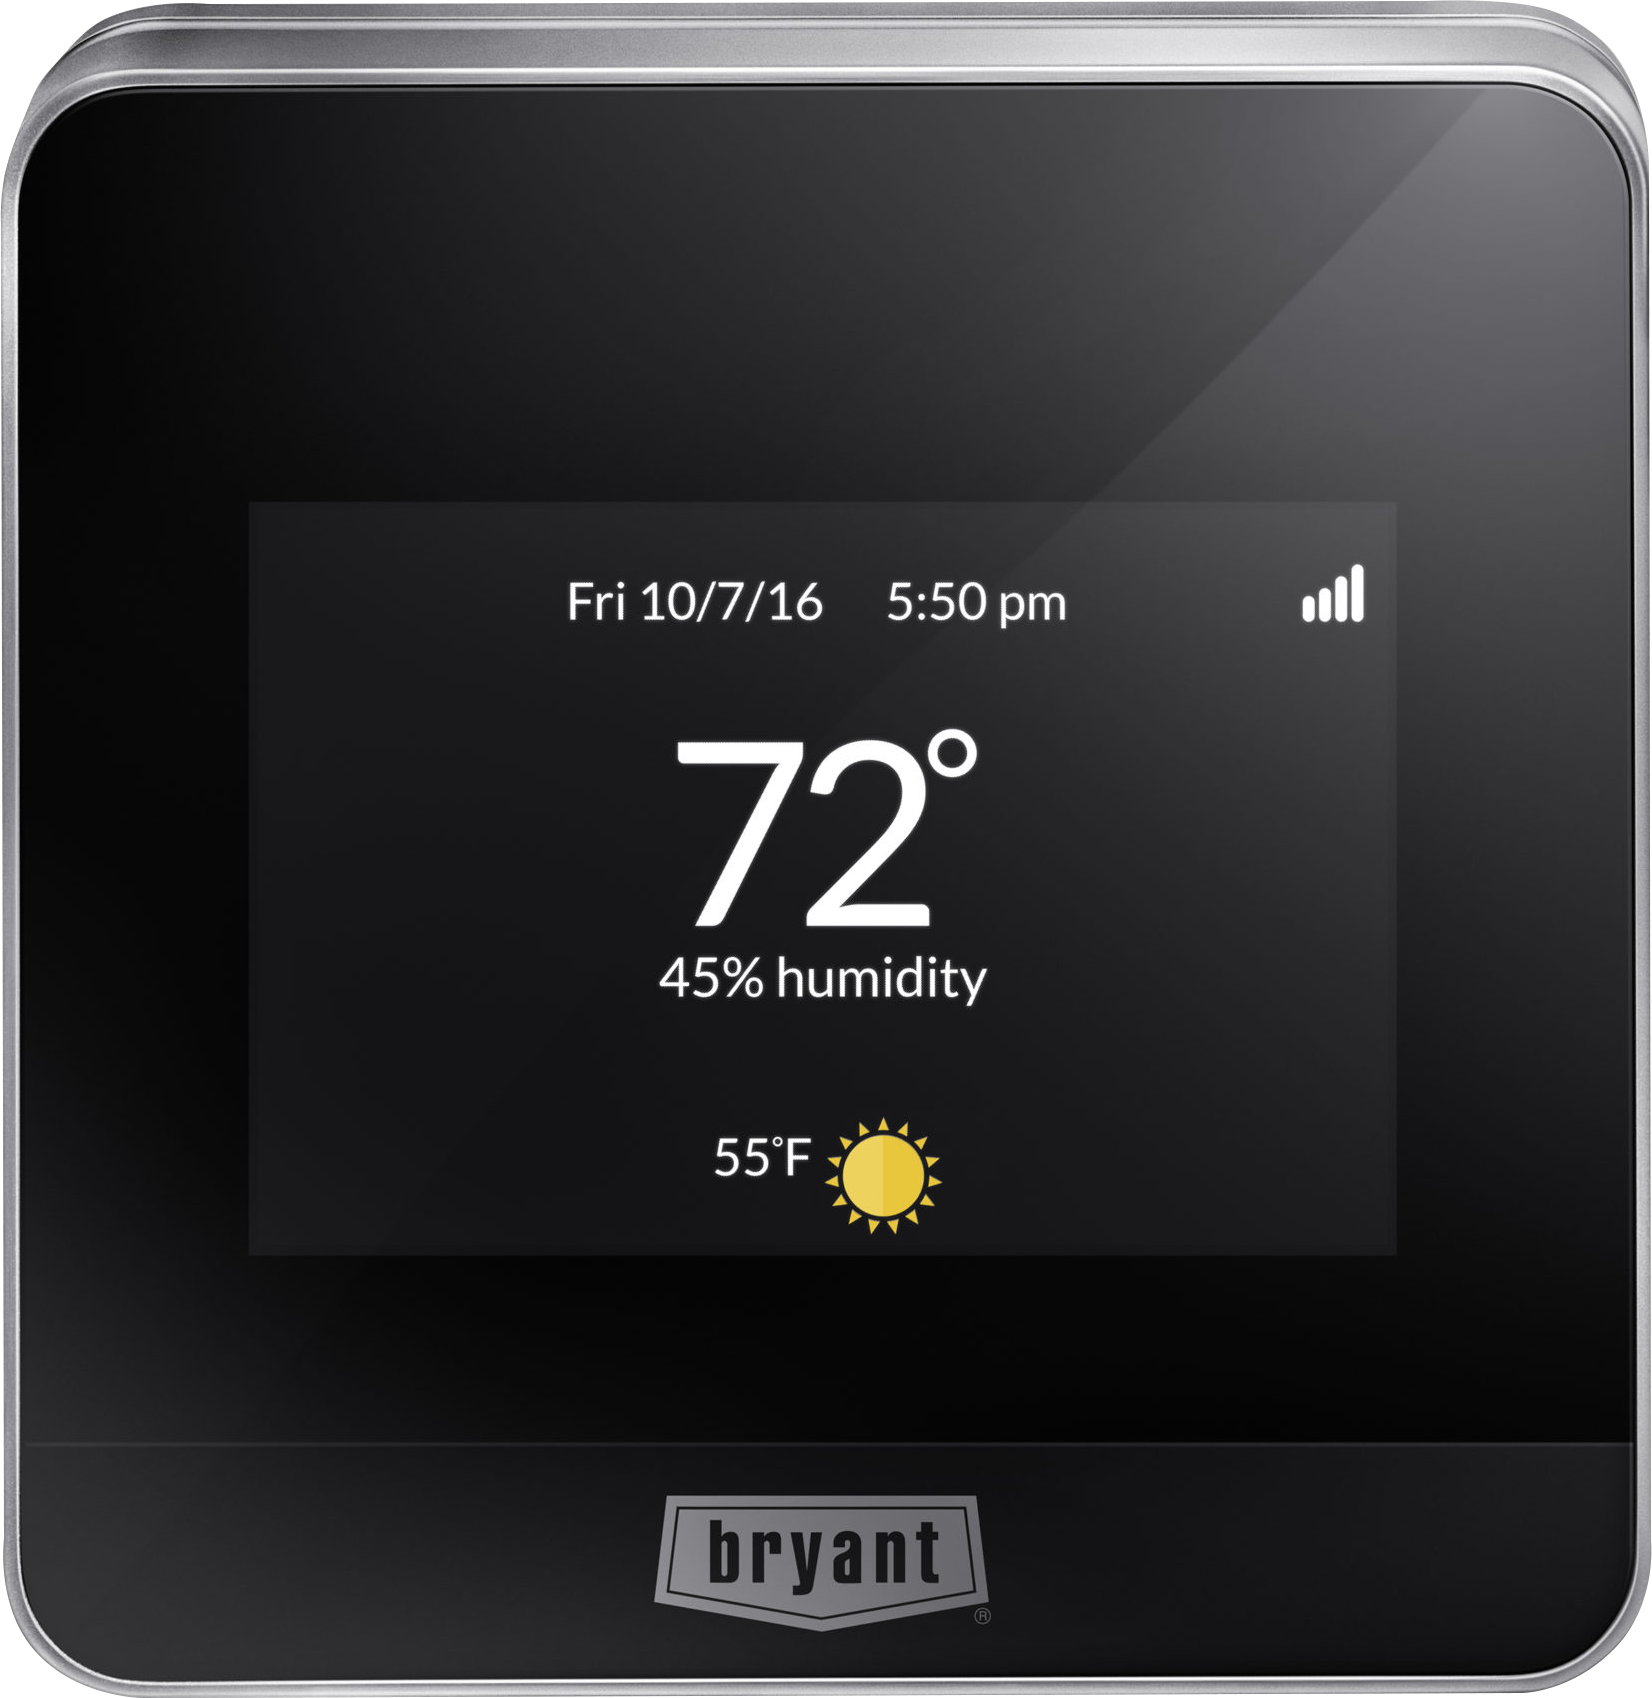 Housewise™ WiFi® Thermostat
WI-FI® Remote Access: Available
Humidity Control: Available